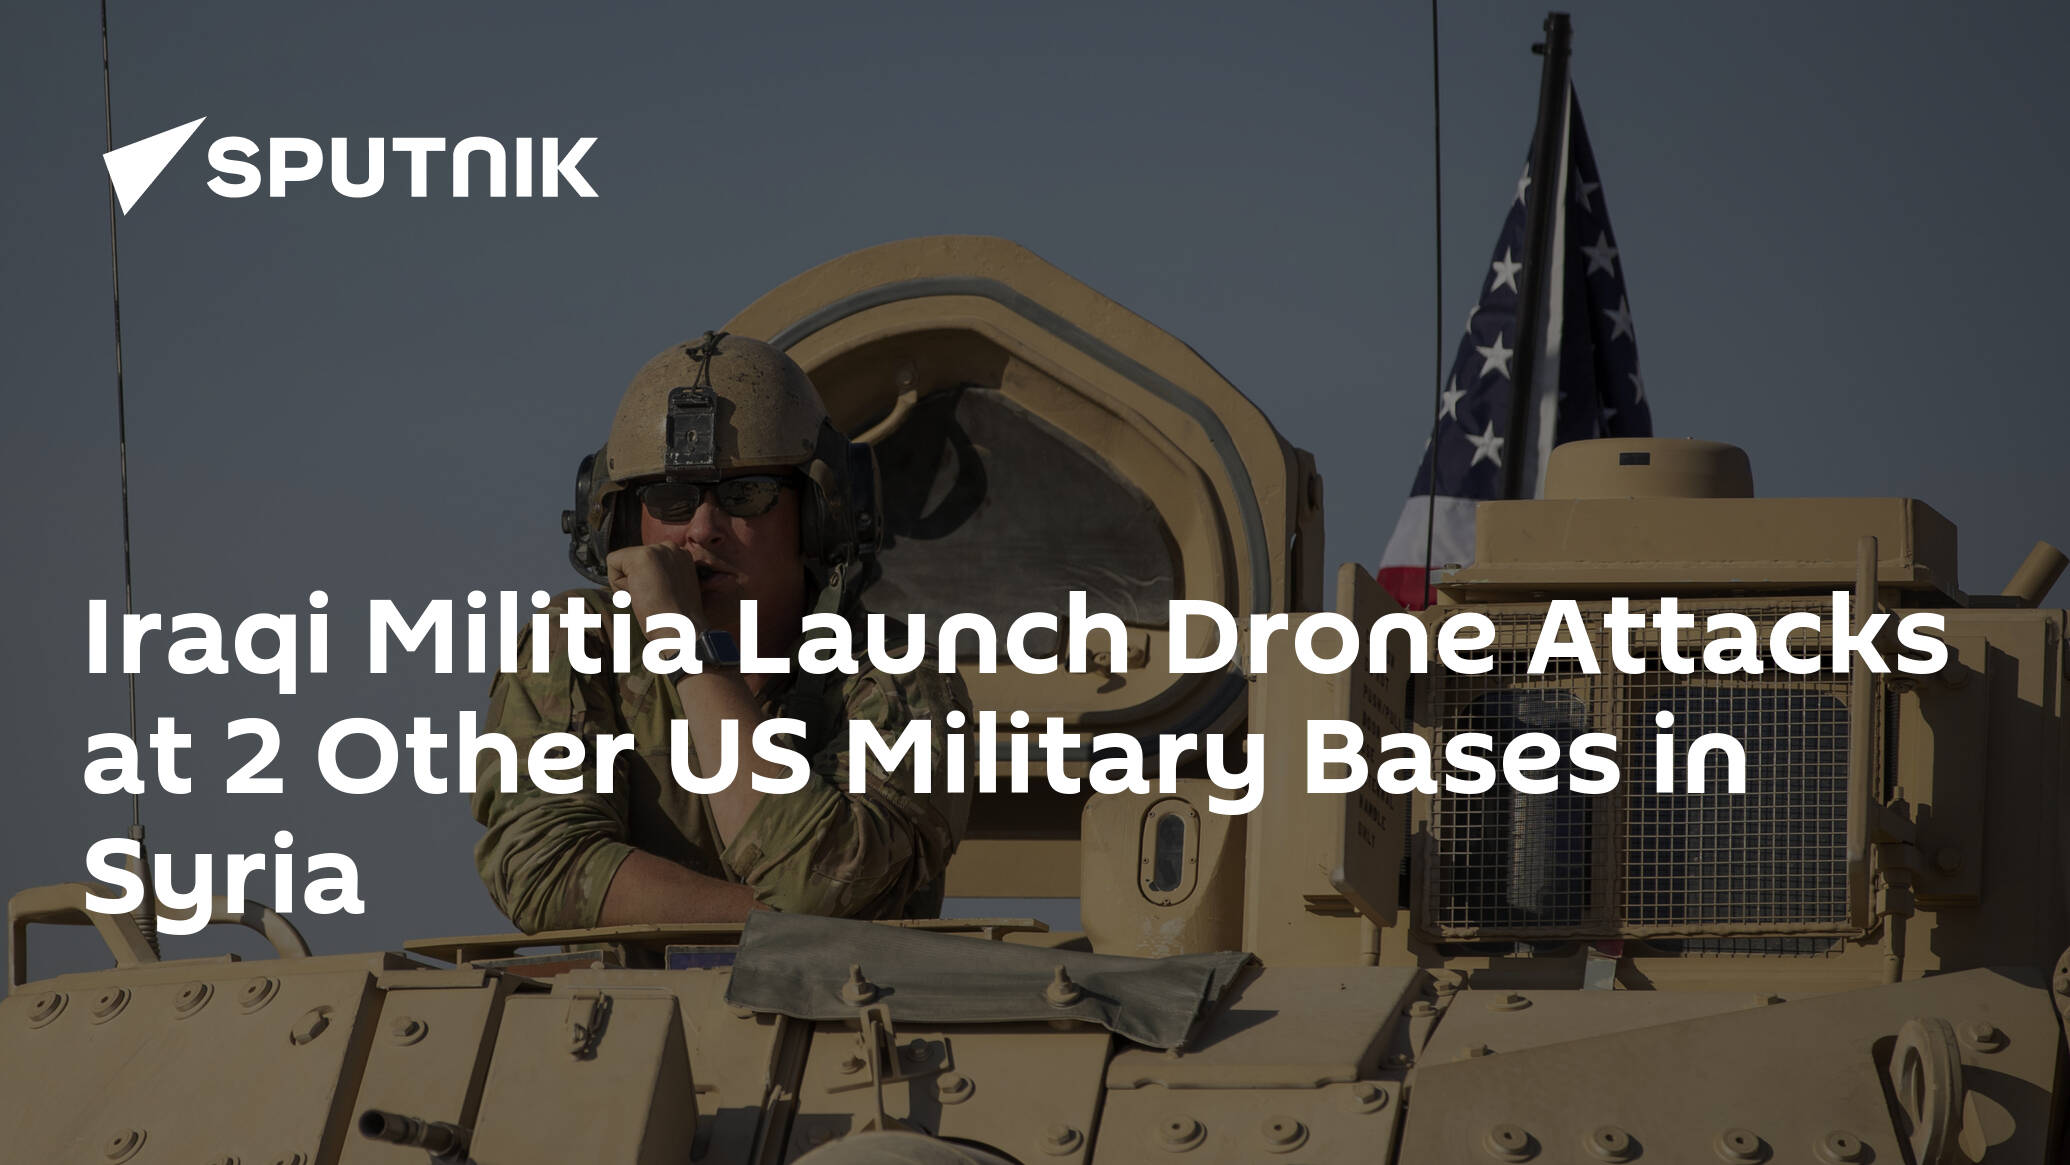 Iraqi Militia Launch Drone Attacks at 2 Other US Military Bases in Syria